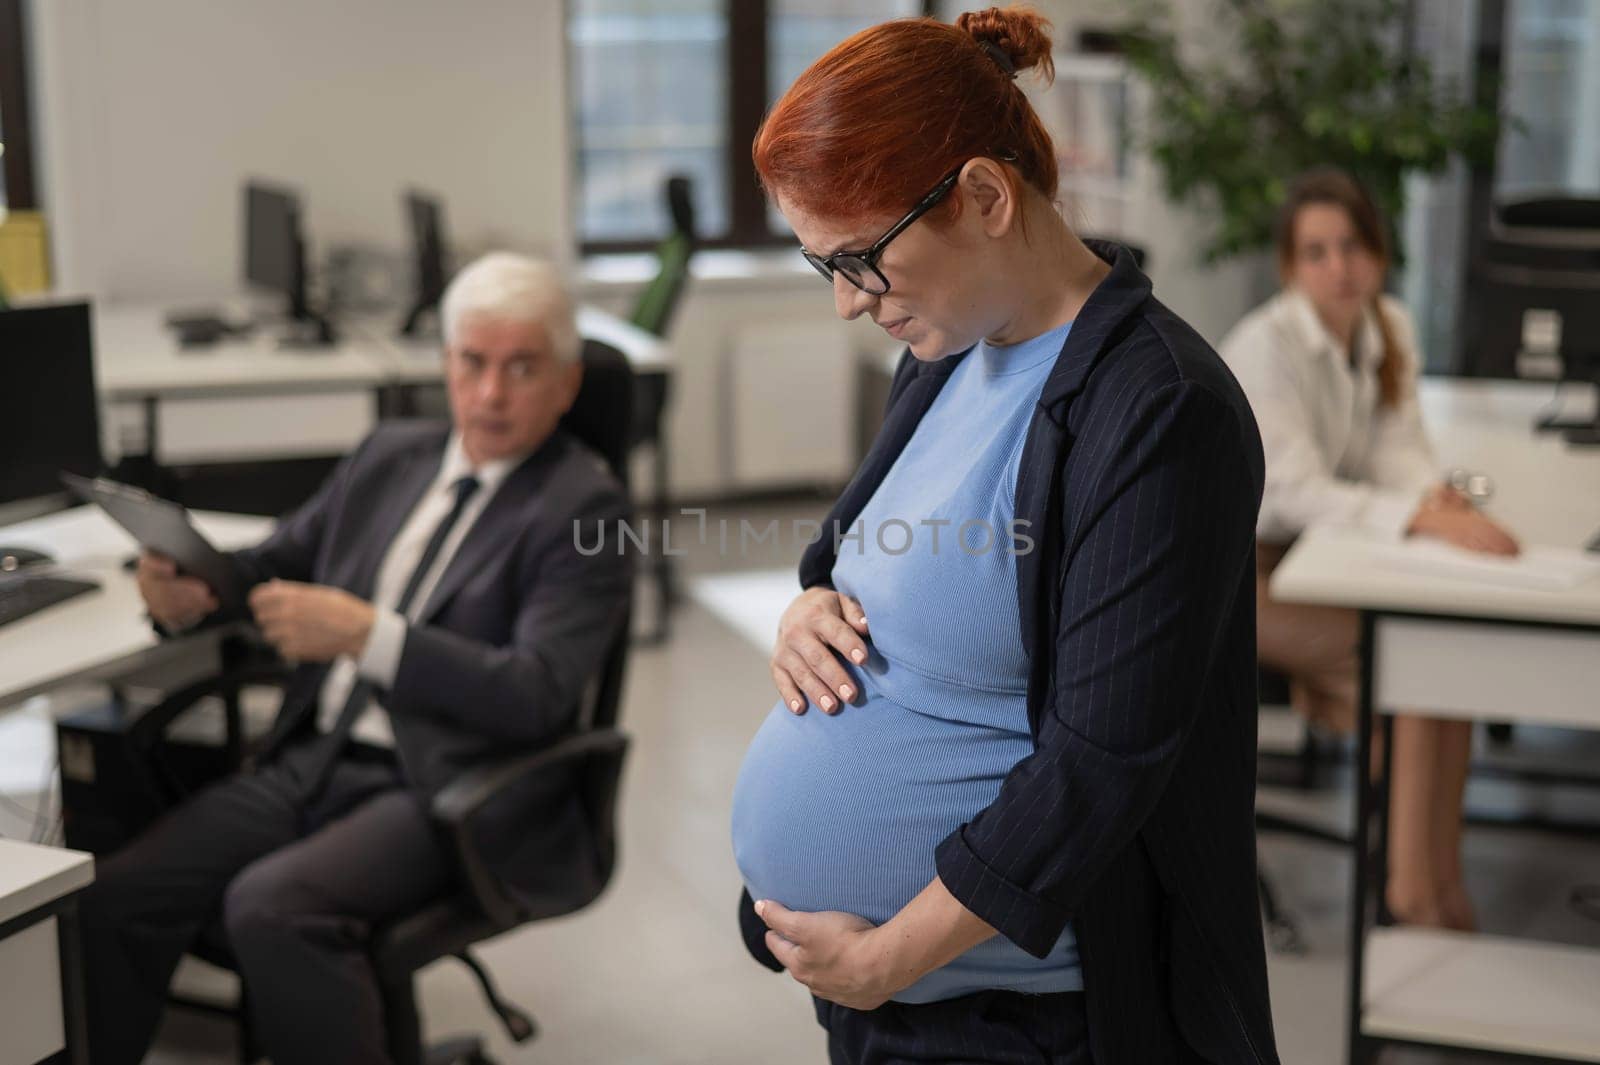 A pregnant woman suffers from pain and holds her stomach while standing in the middle of the office next to her colleagues. by mrwed54